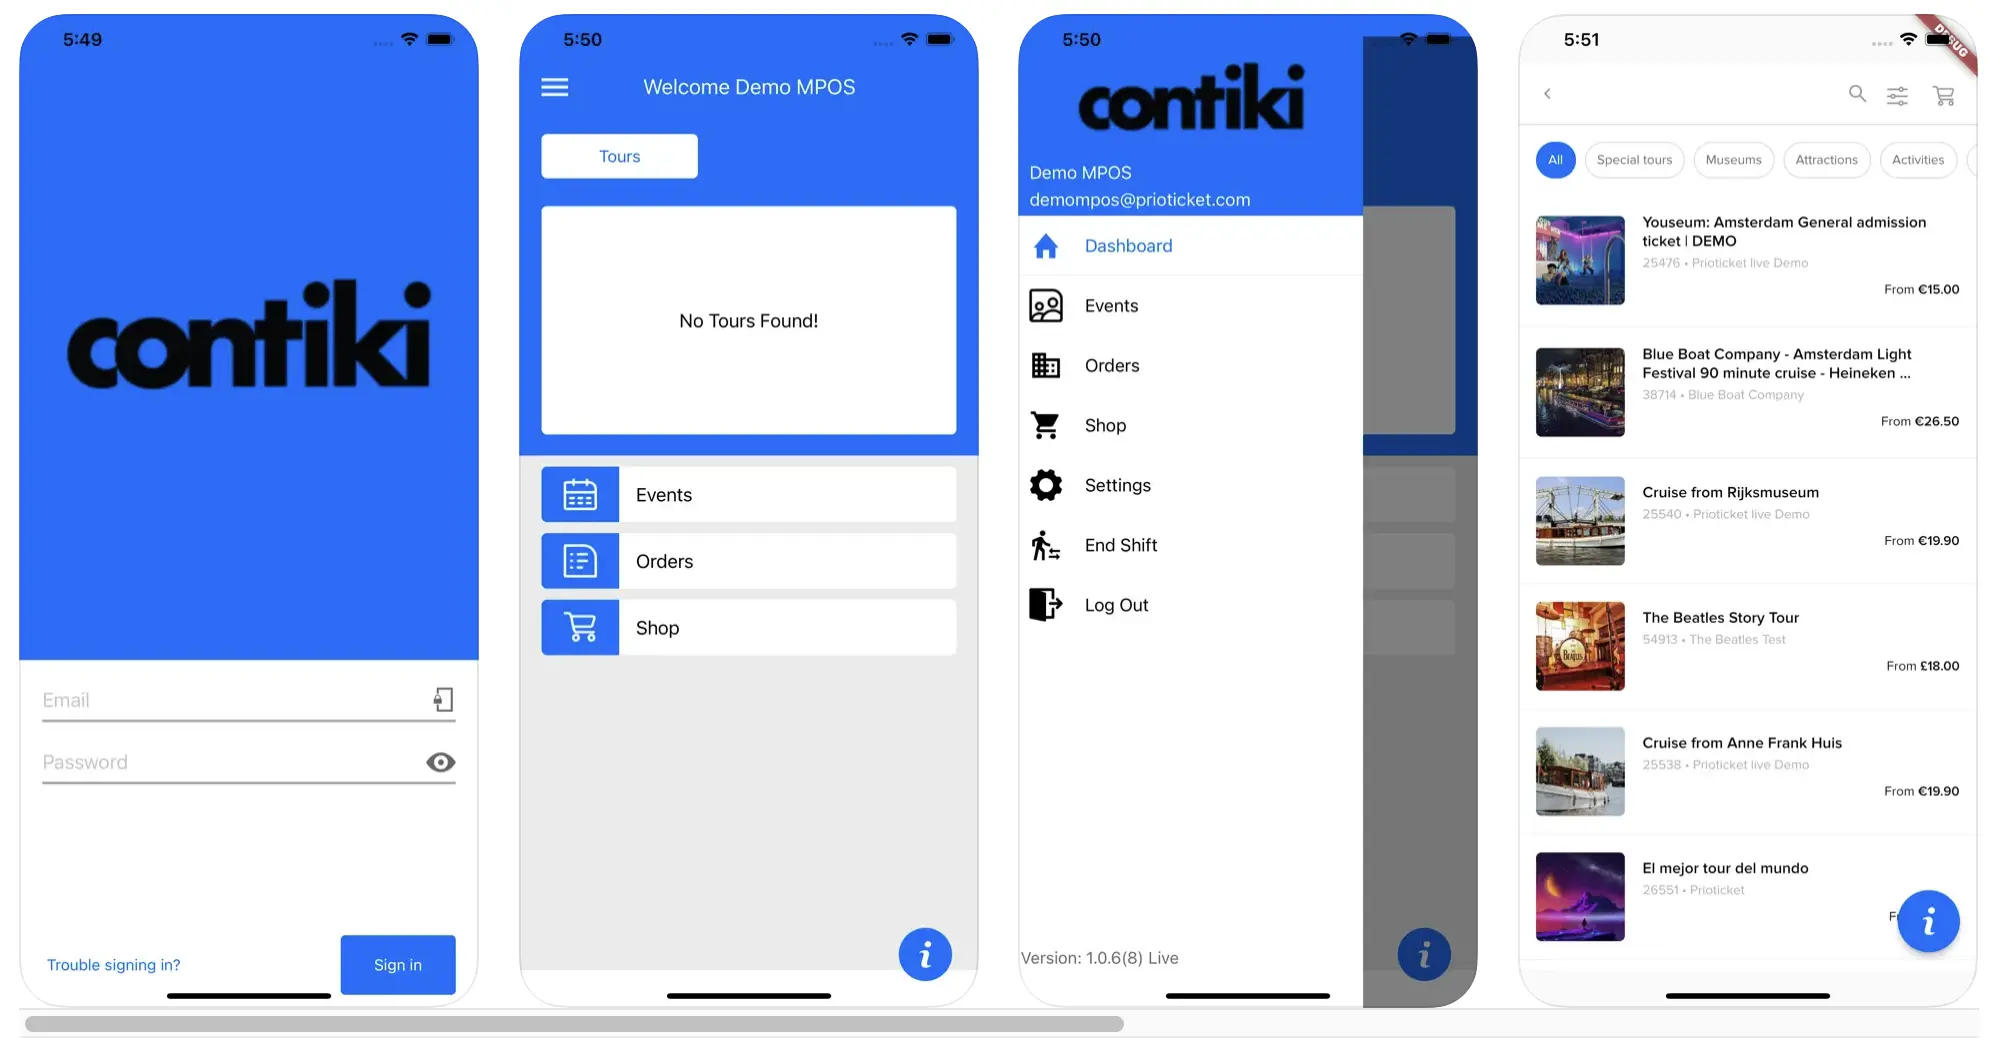 Contiki mobile app on the App Store is a screenshot of the app's home screen, featuring a vibrant and visually appealing interface. The image shows various travel destinations and experiences, with beautiful photos that entice users to explore the world with Contiki.